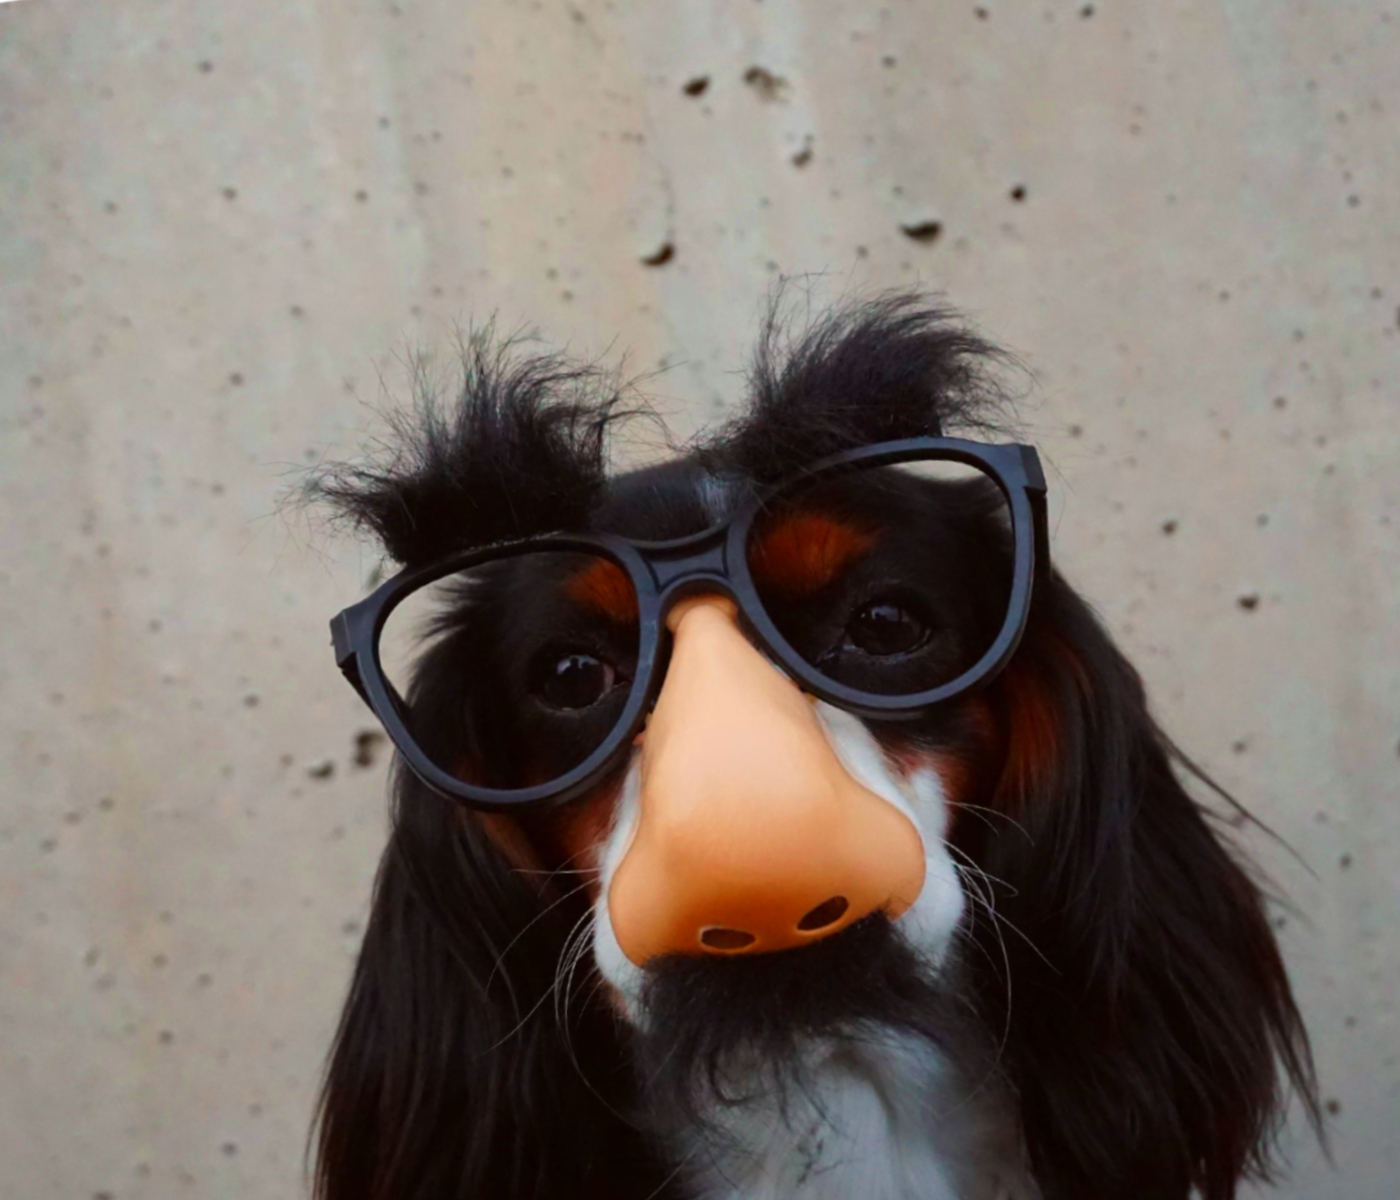 A dog with a funny mask, glasses and eyebrows on